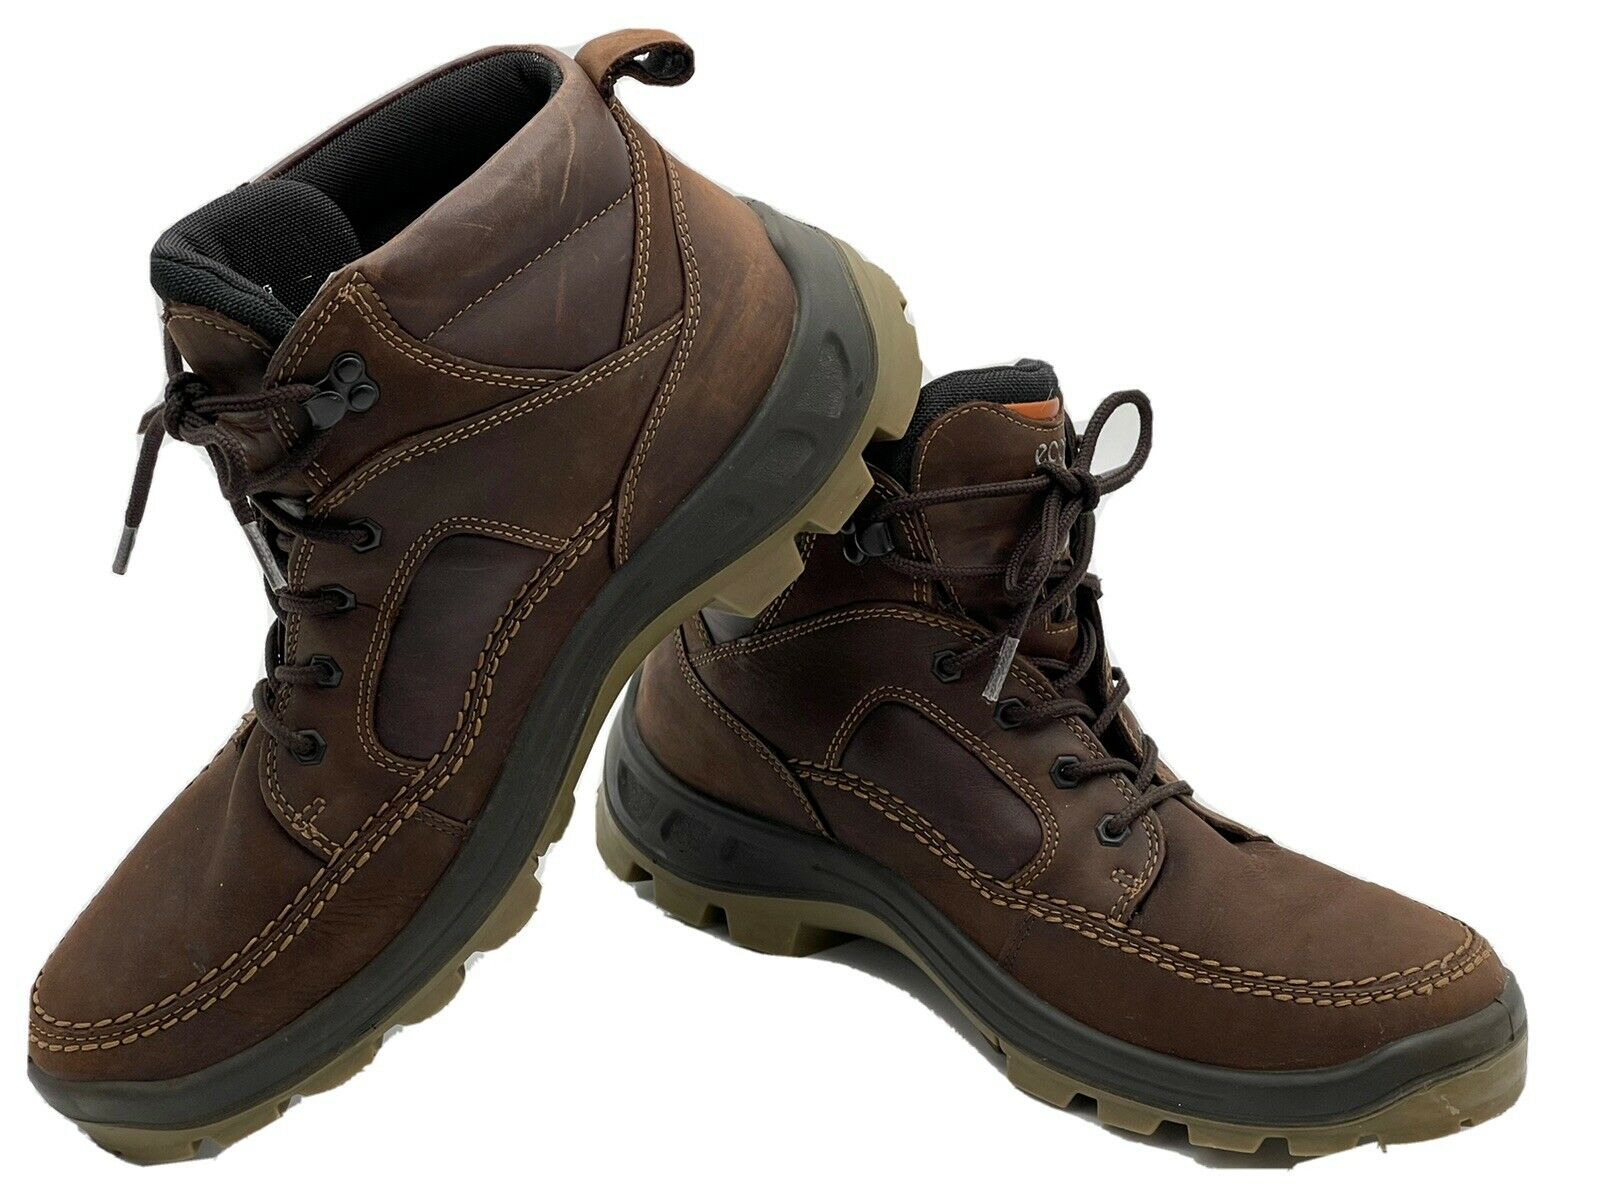 Ecco Men's Track High Boots Hiking Gore-Tex Leather Brown EUR 47 / US 13 - 13.5